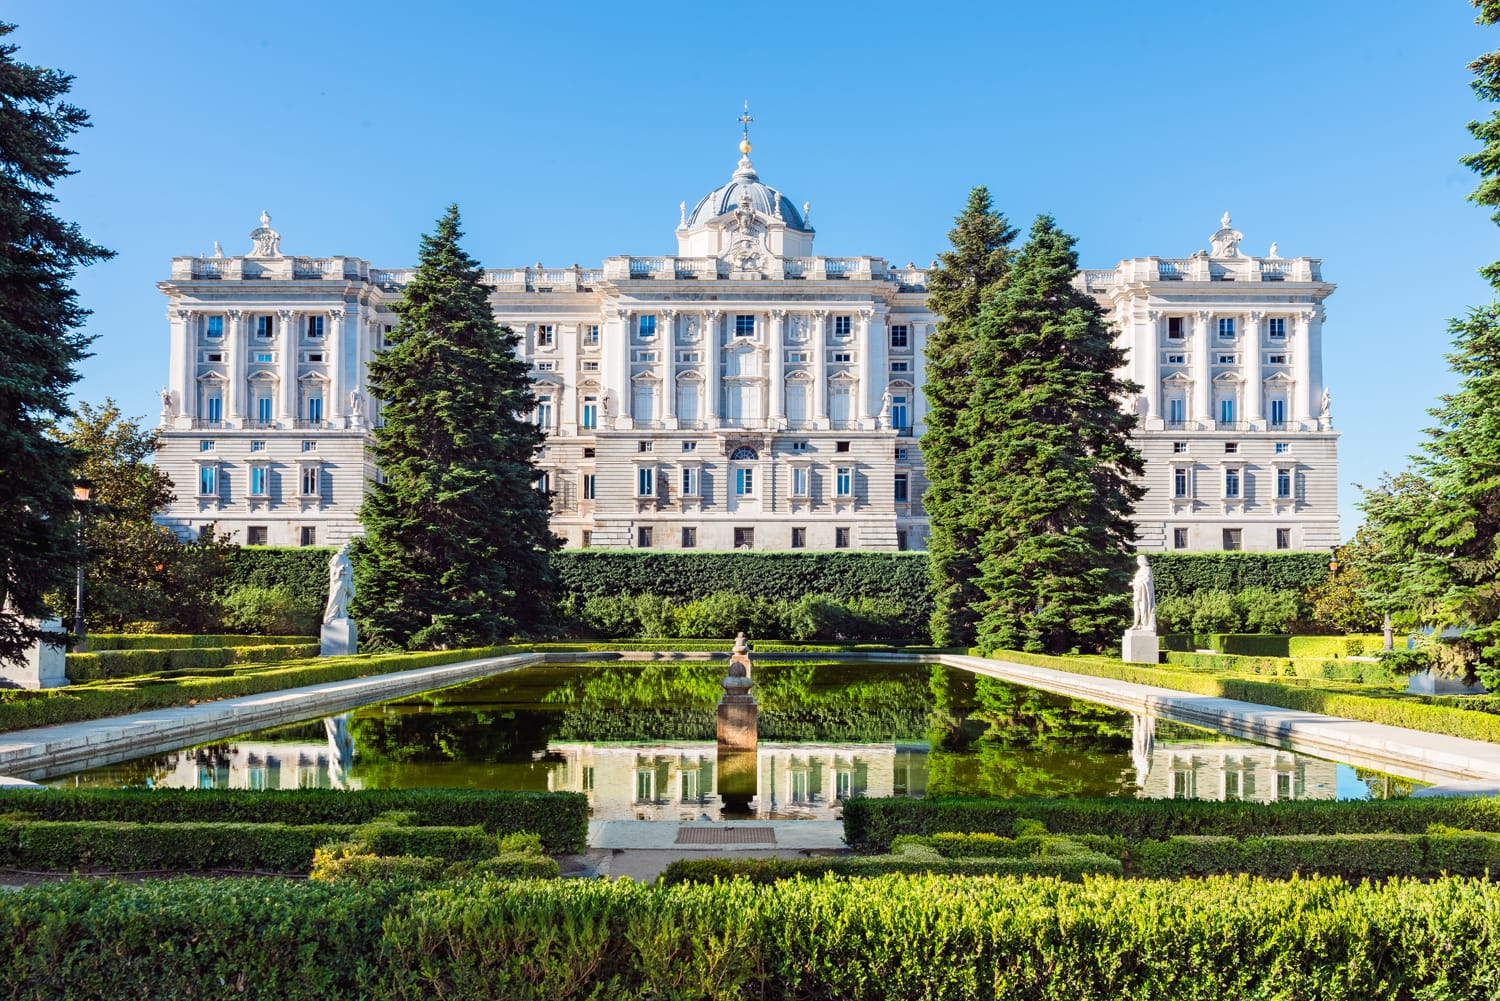 Royal Palace in Madrid Spain